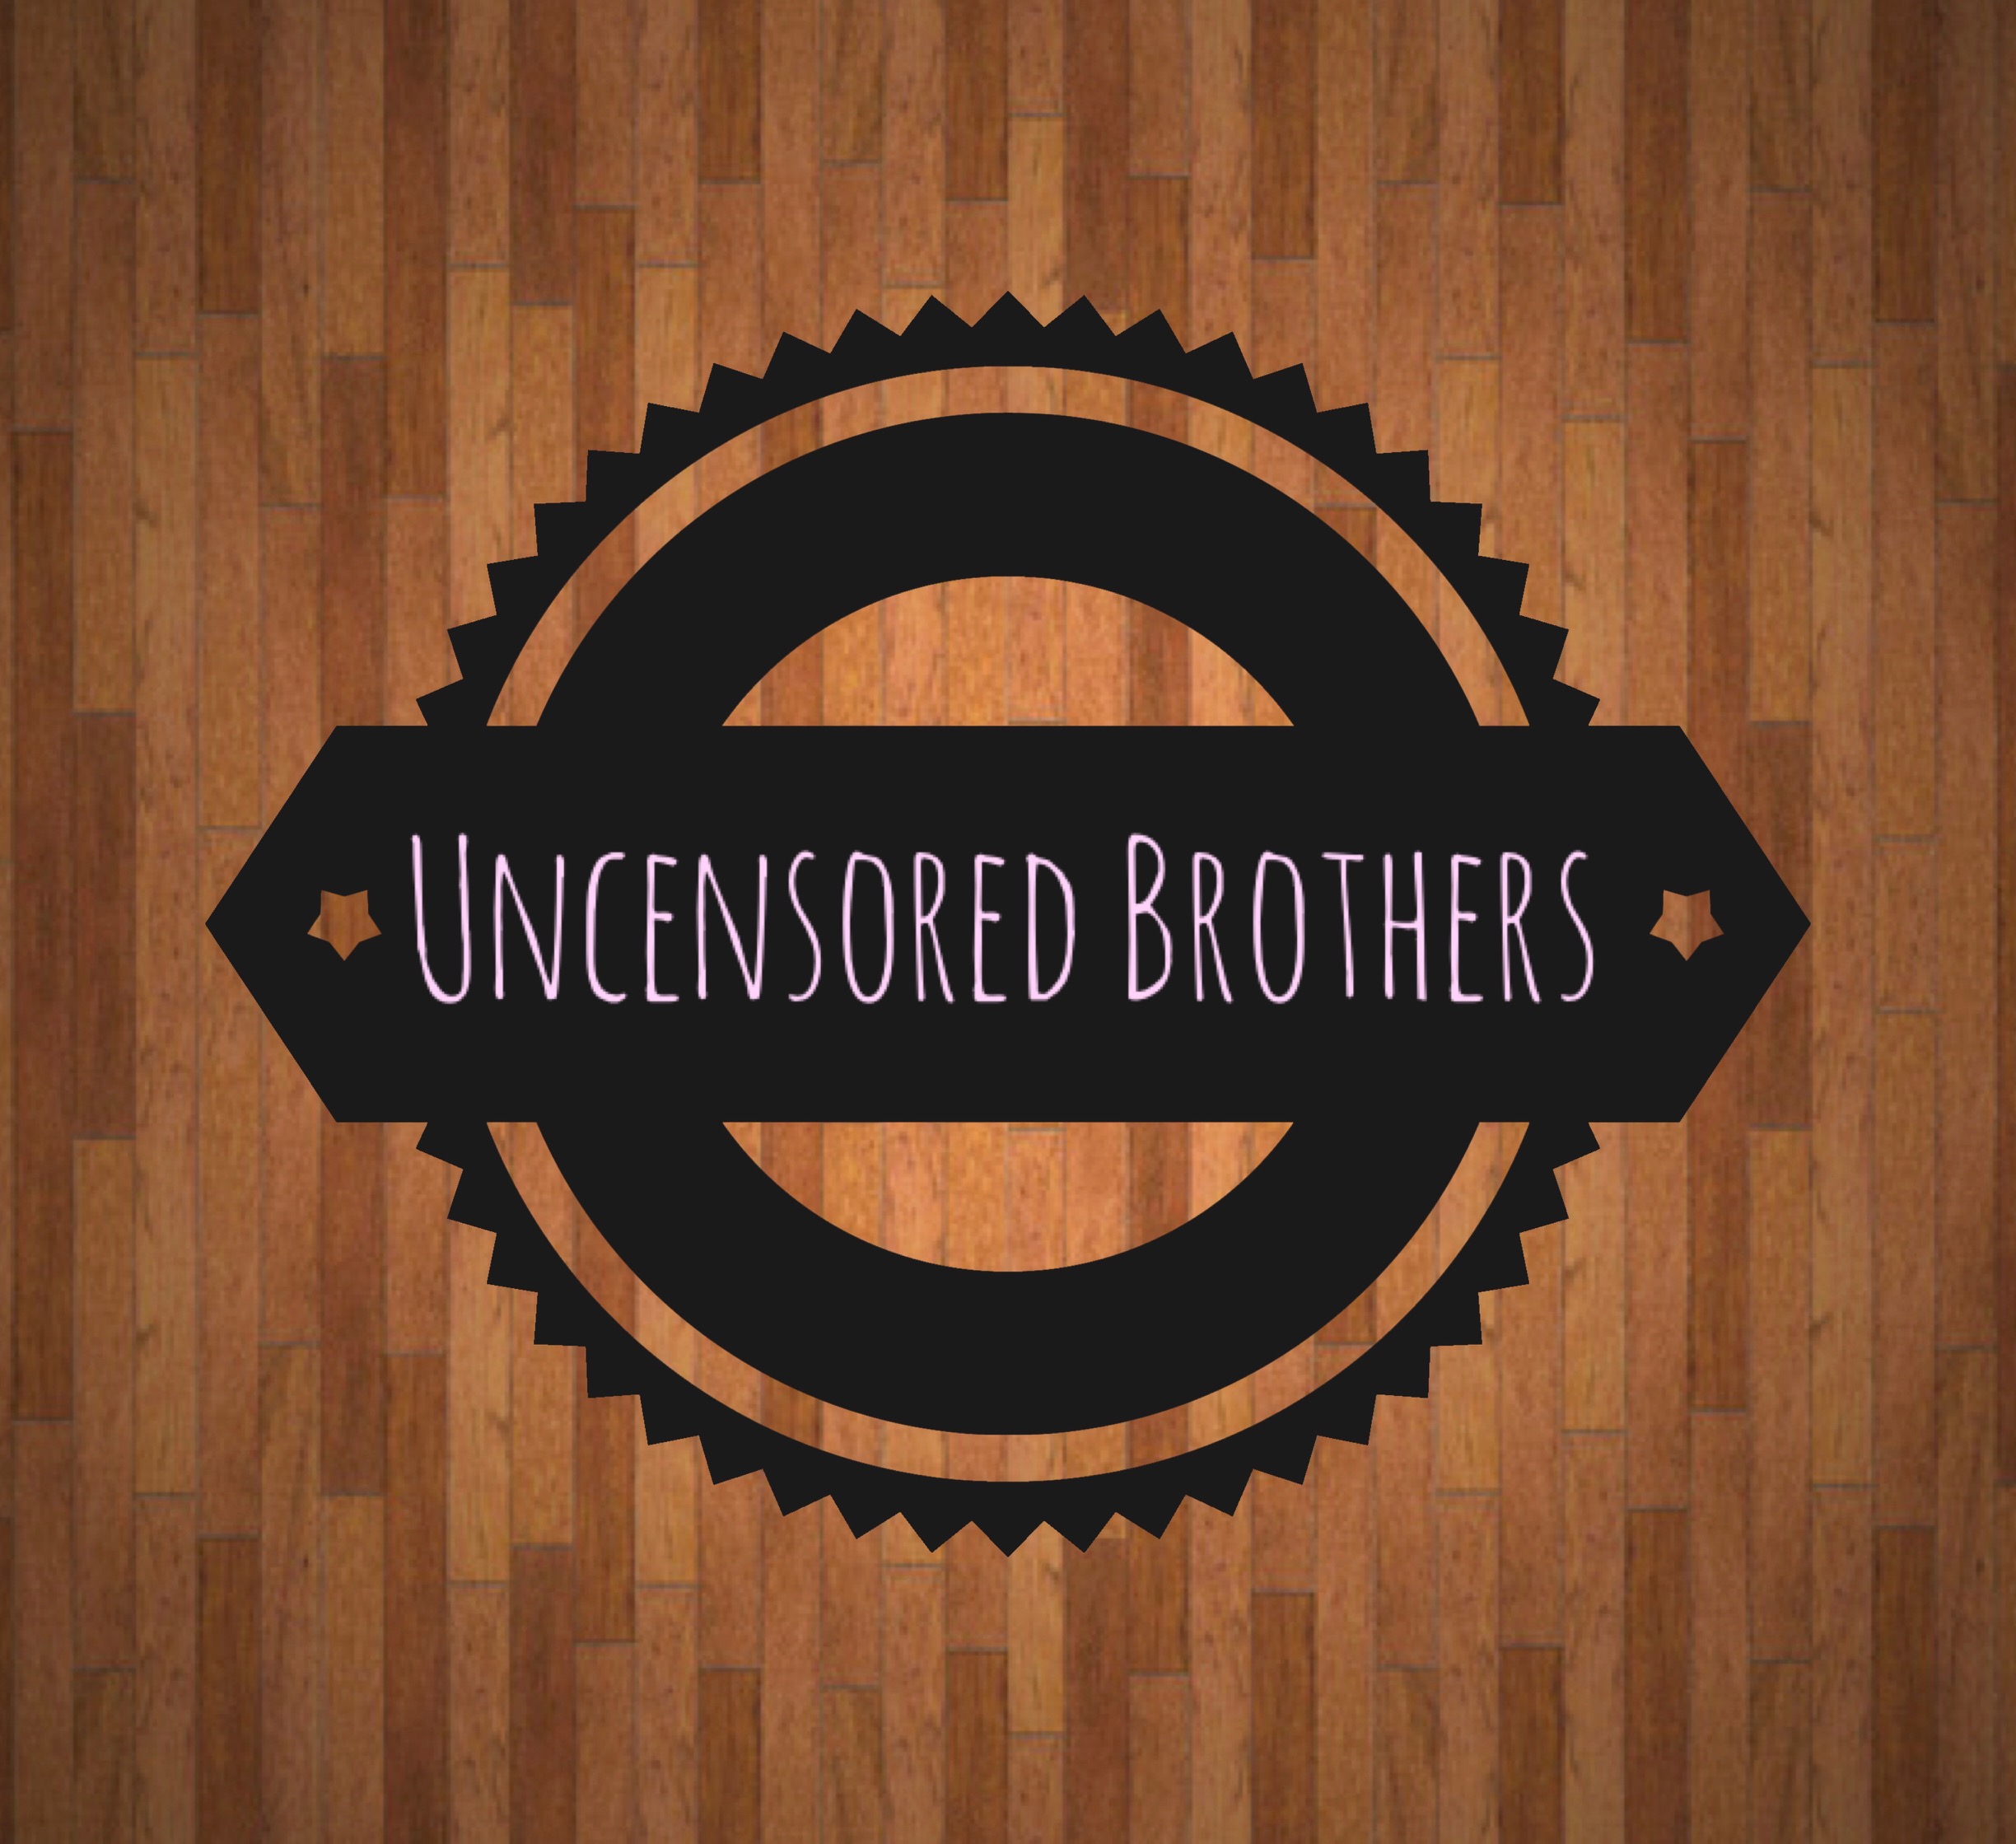 Uncensored Brothers (Episode 2)